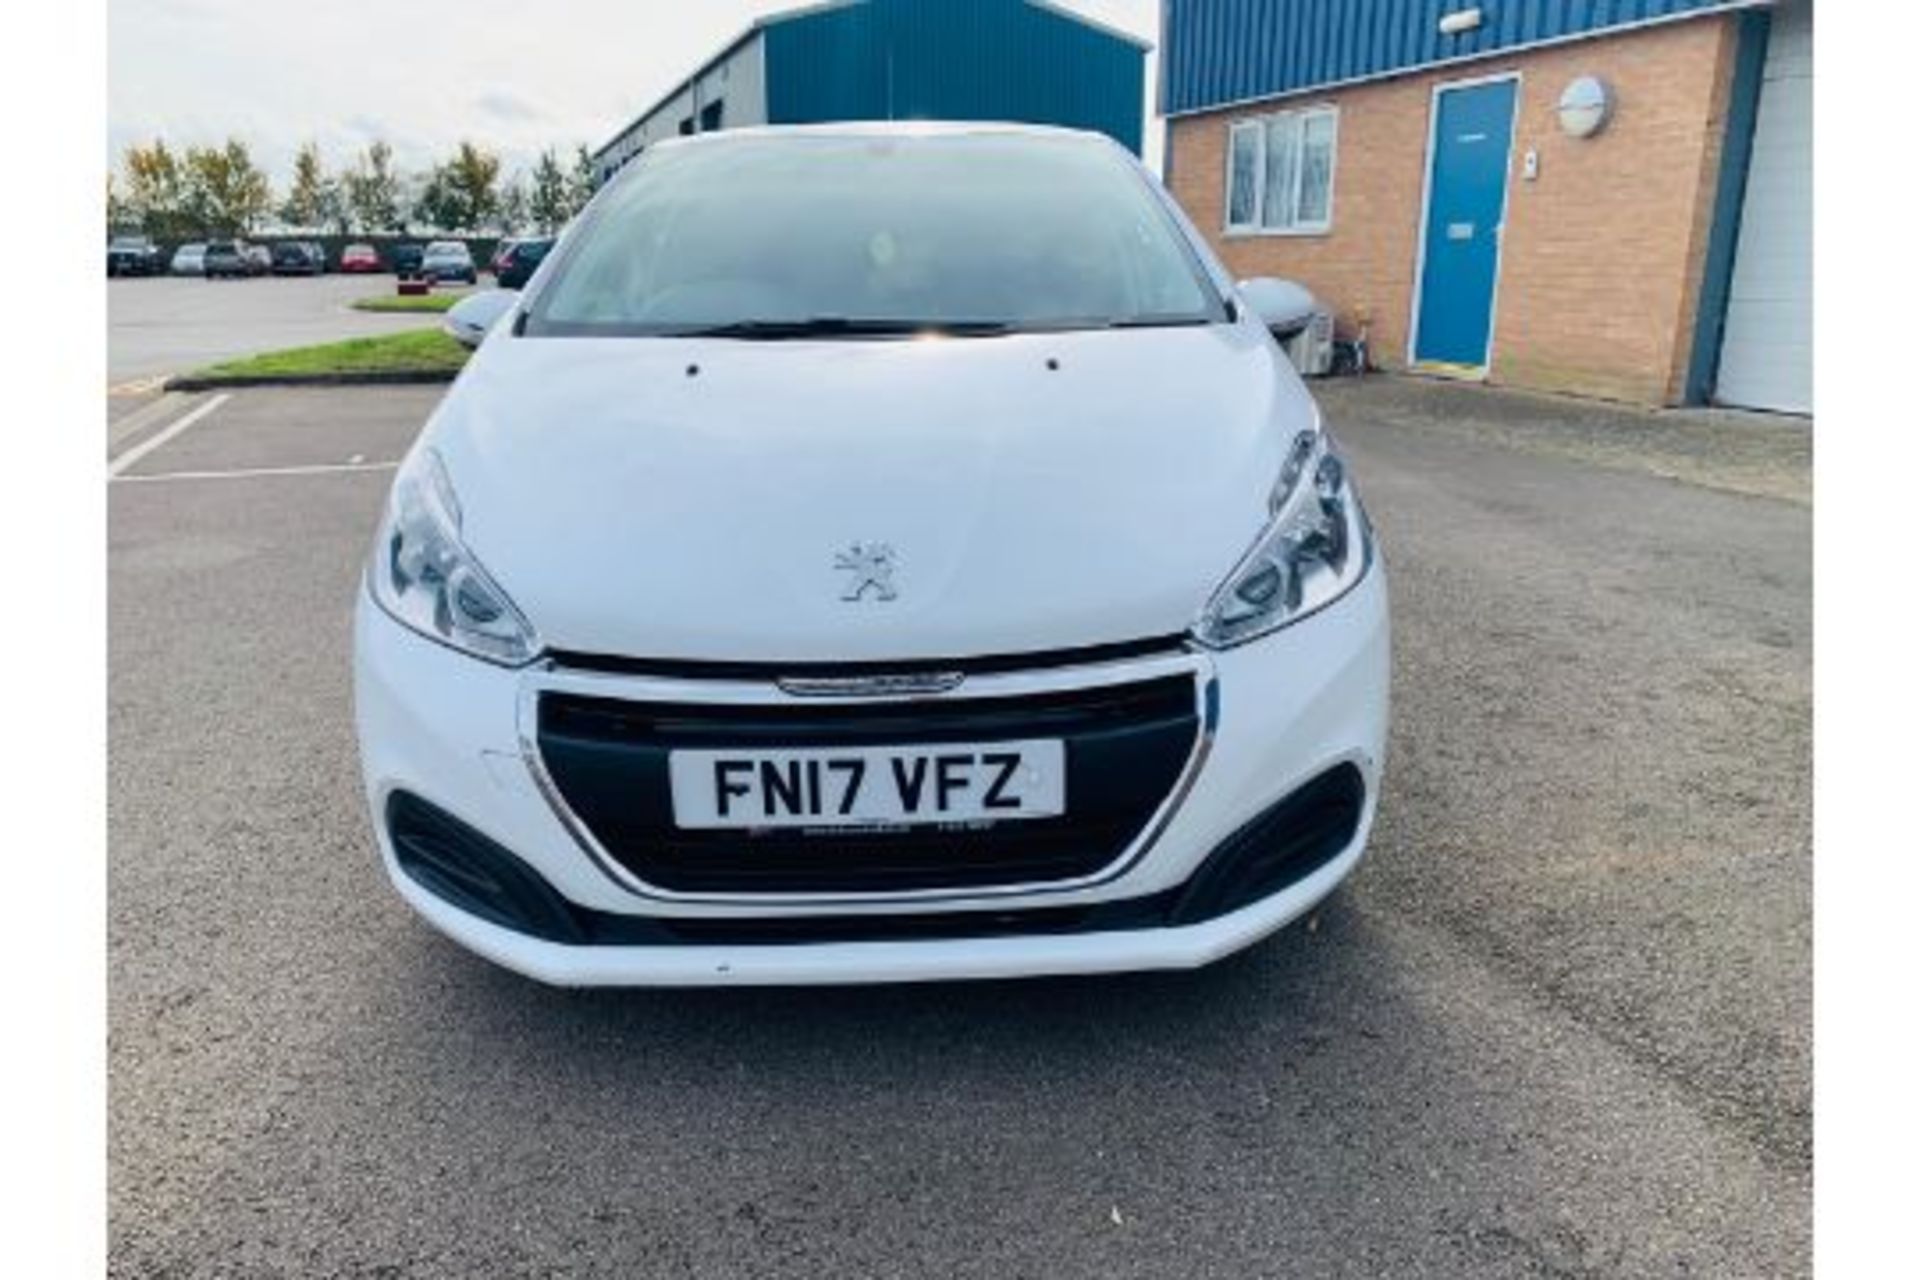 (RESERVE MET) Peugeot 208 1.6 HDI Active - 2017 17 Reg - 1 Keeper From New - Full History - Sat Nav - Image 4 of 22